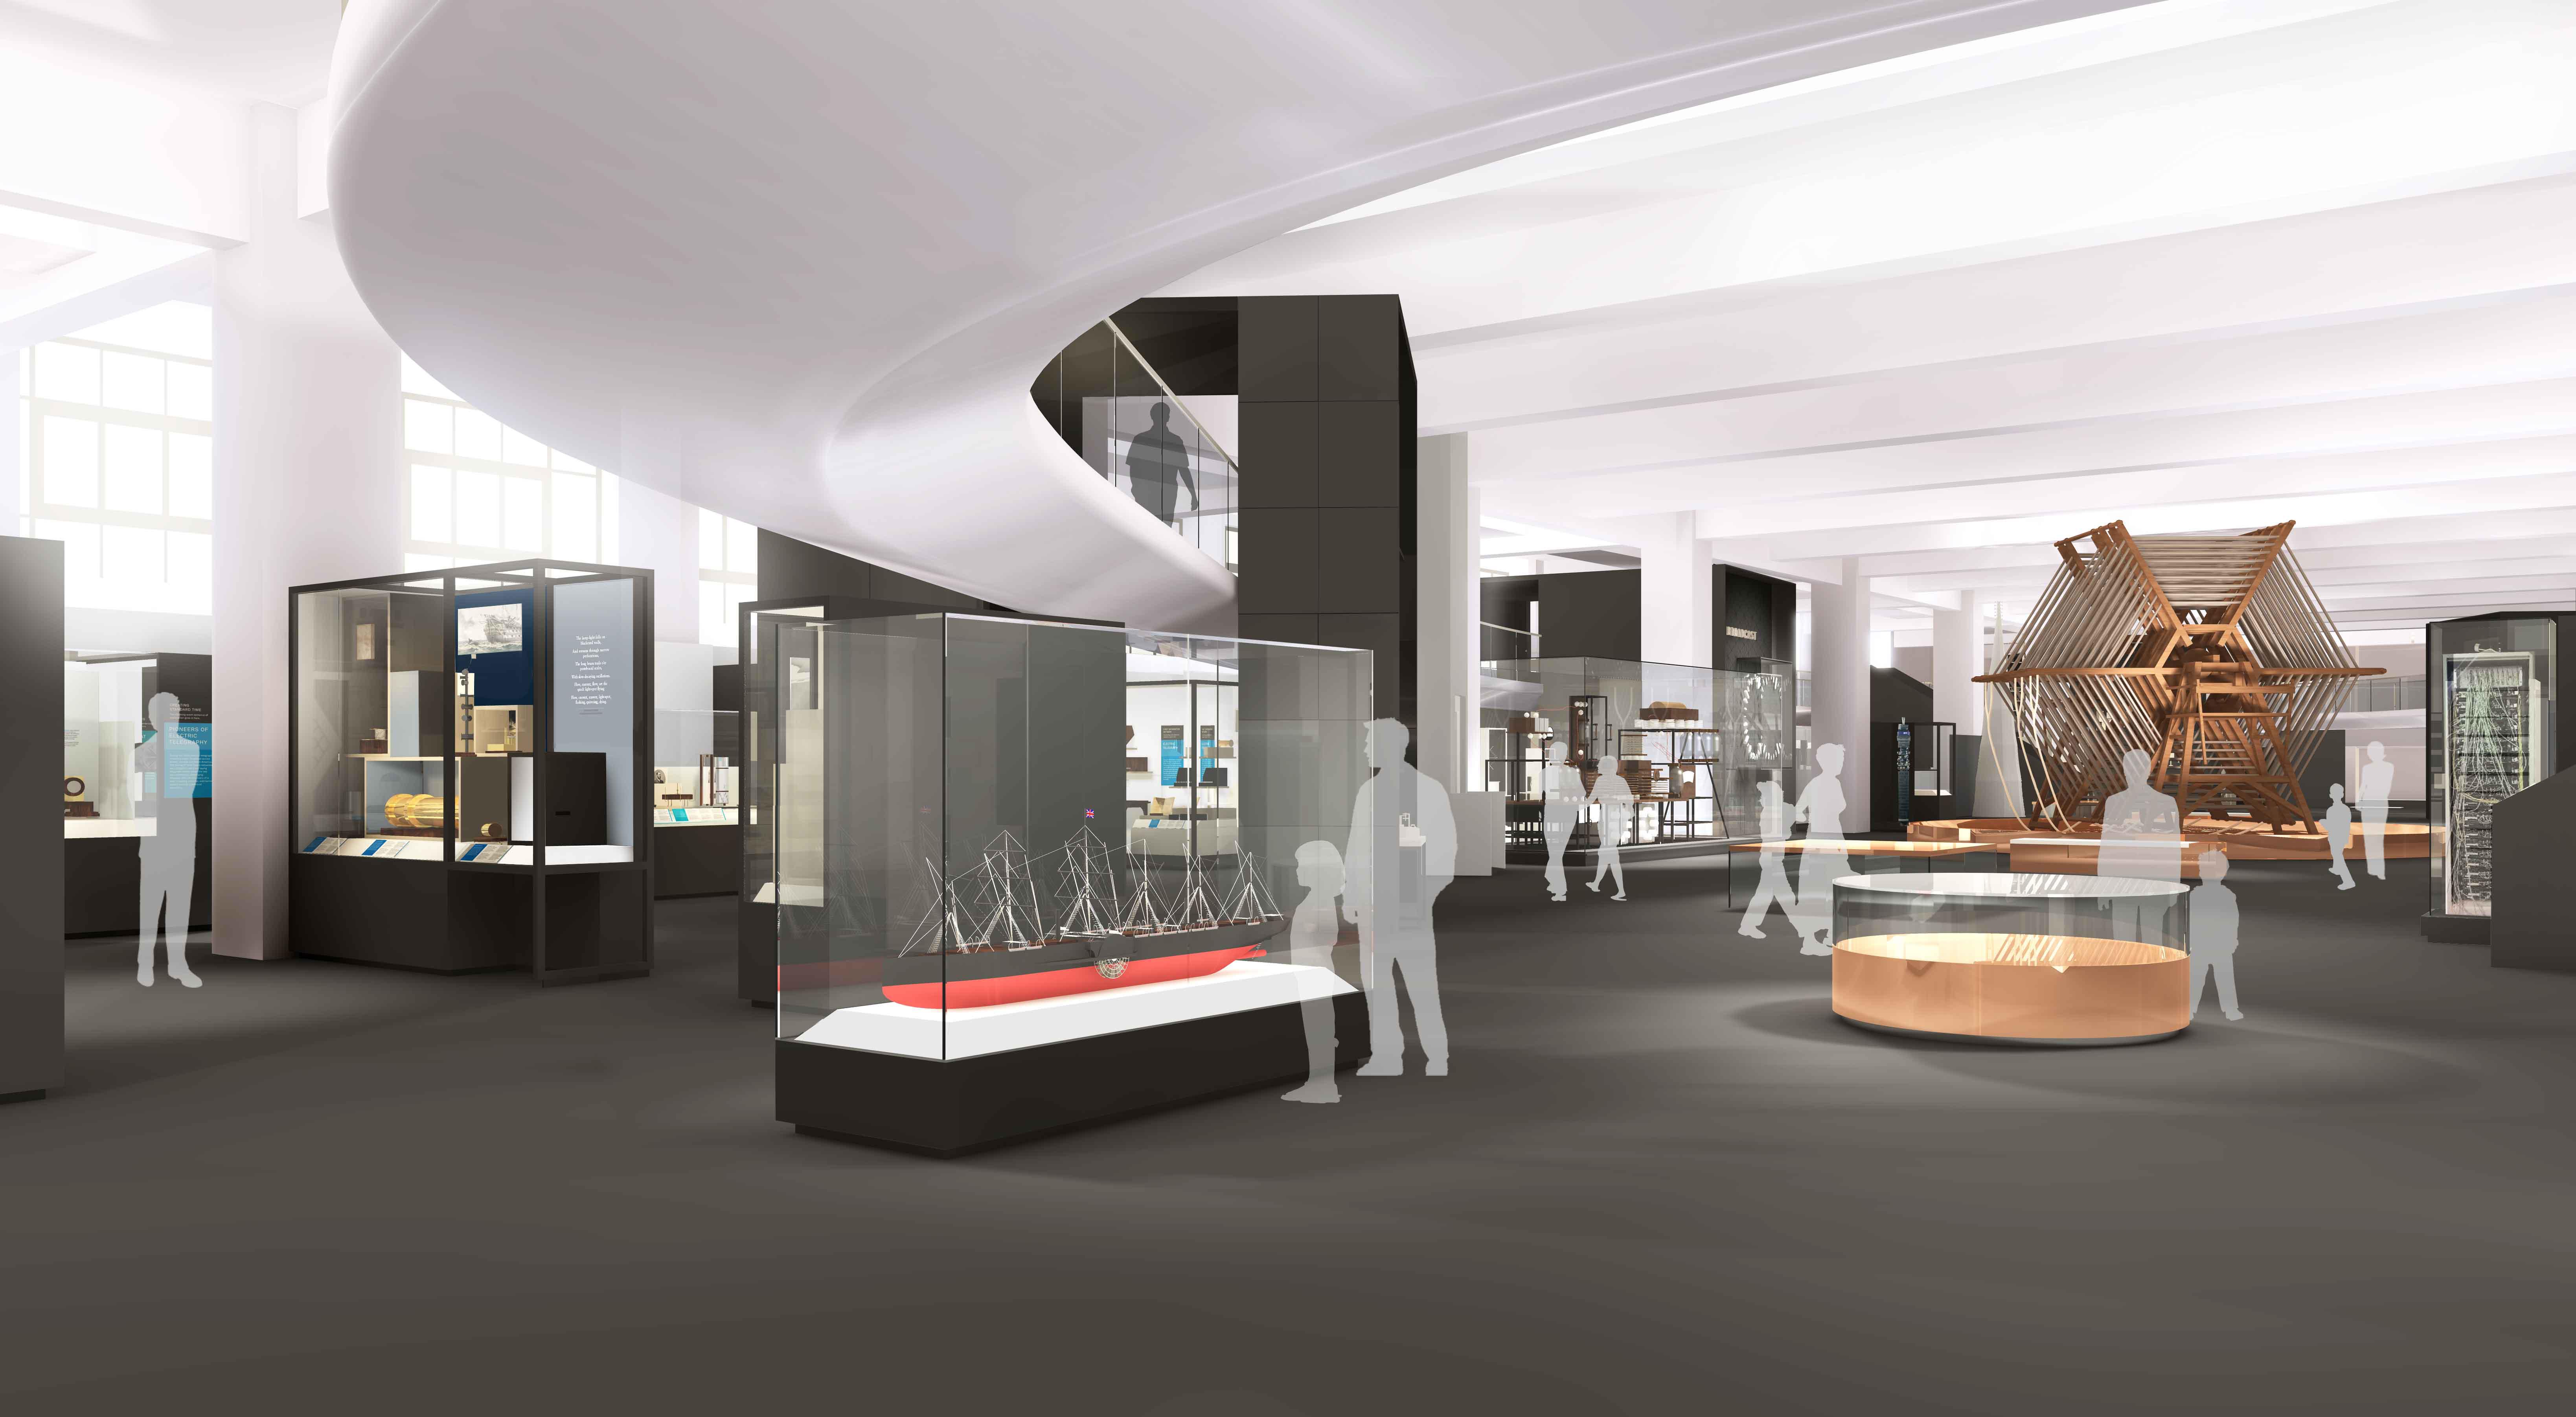 An artist's impression of the Information Age gallery. Image credits: Science Museum / Universal Design Studio